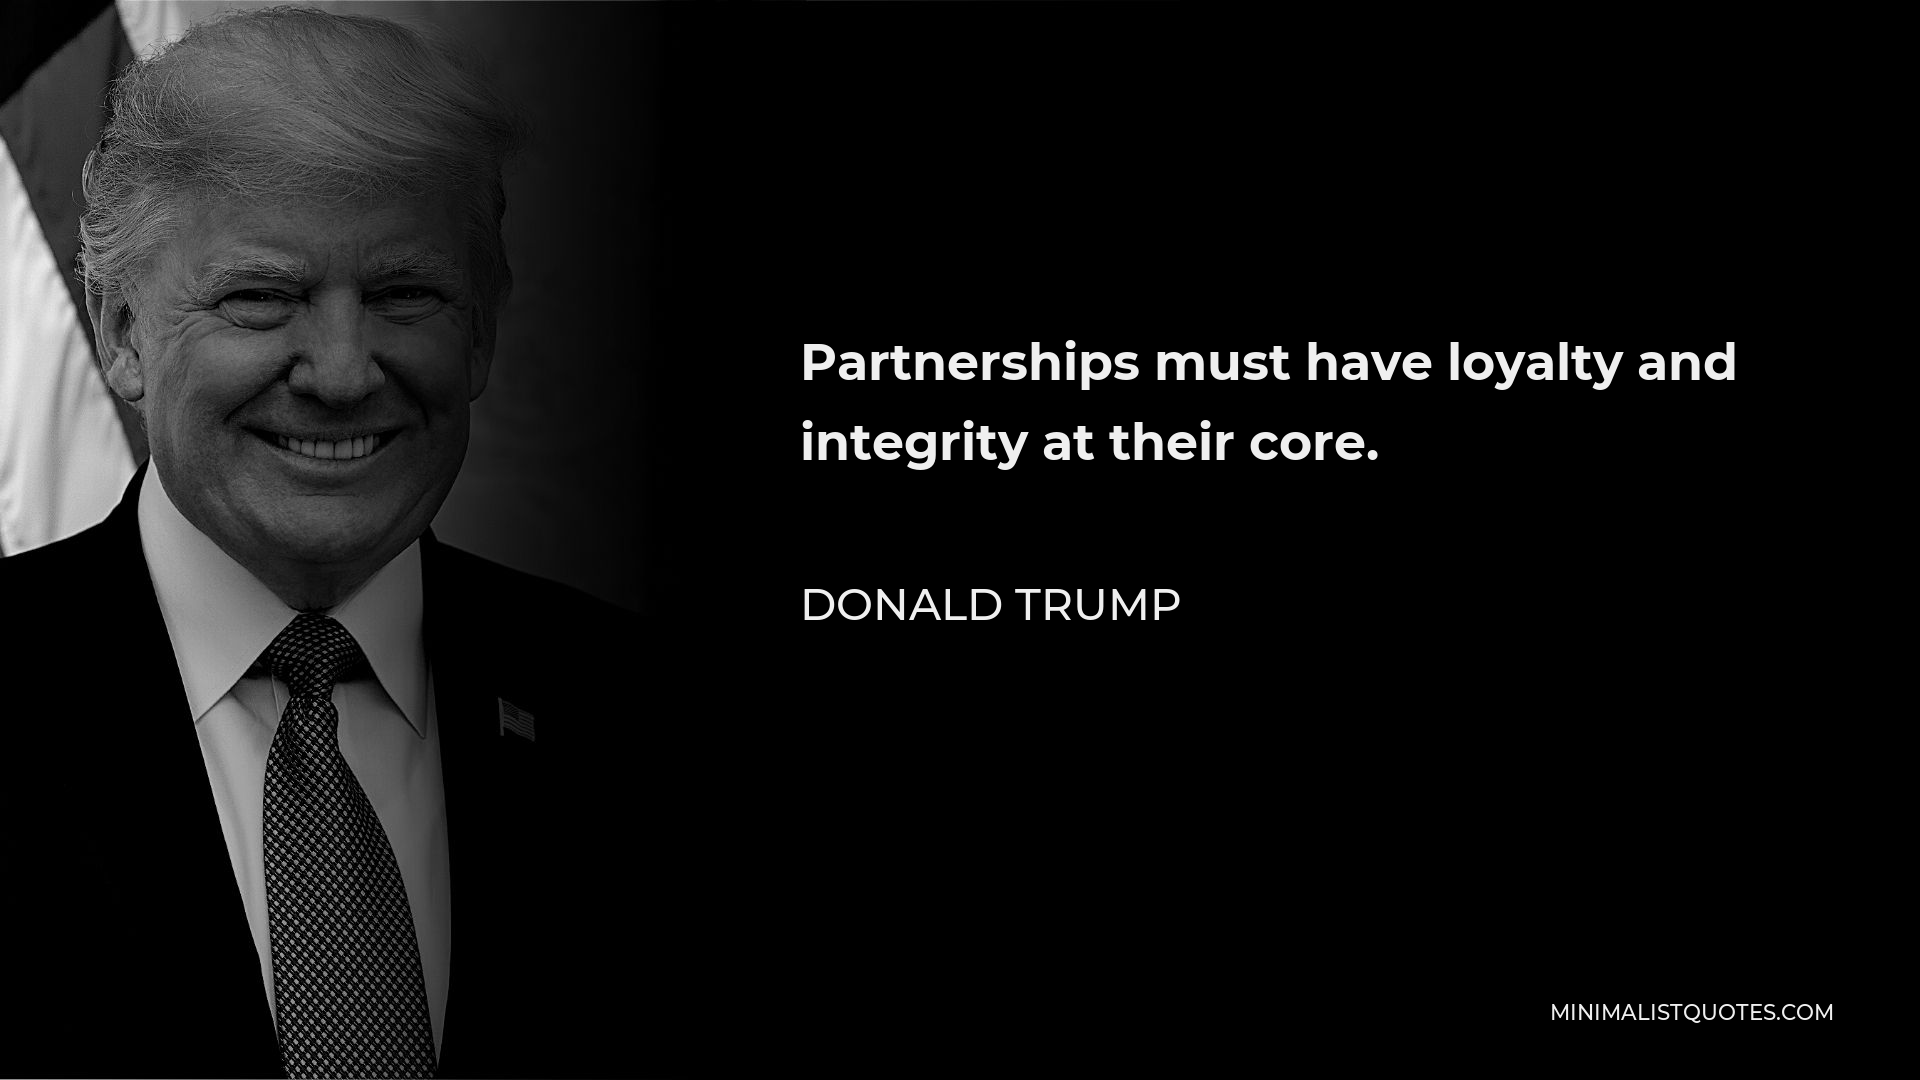 Donald Trump Quote - Partnerships must have loyalty and integrity at their core.